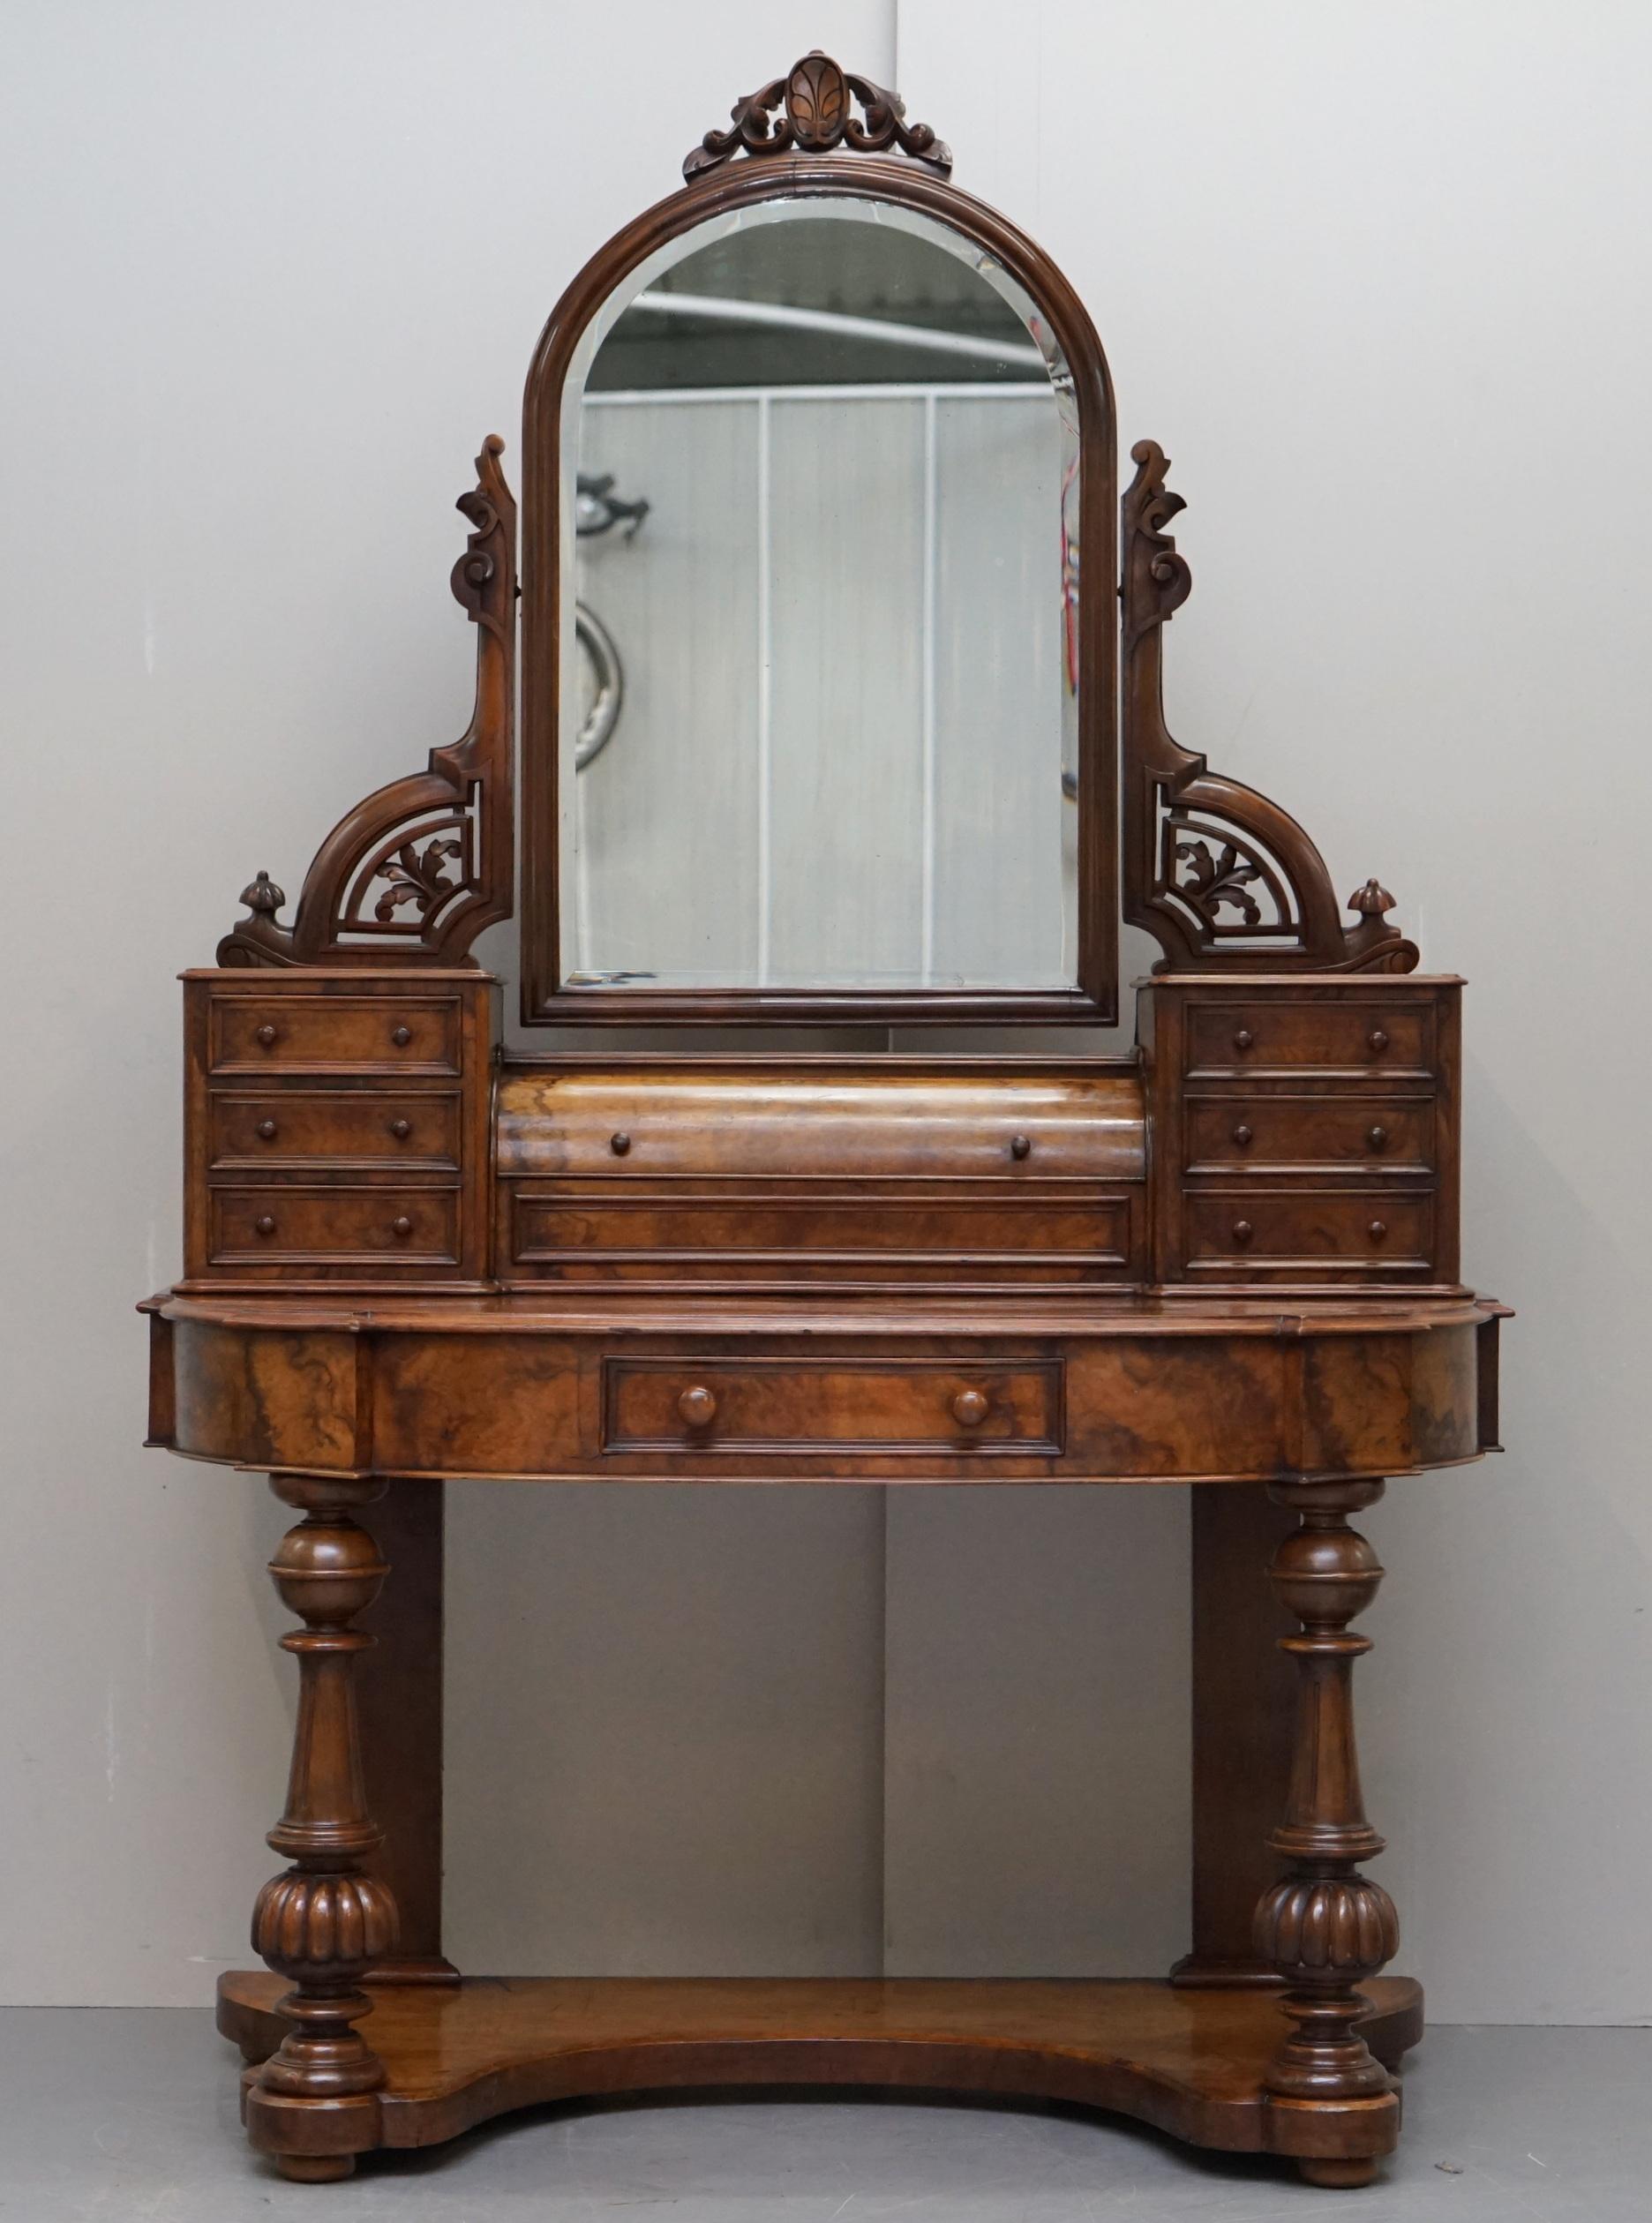 We are delighted to this sublime Victorian burr & quarter cut walnut ladies dressing table with original plate mirror

A very good looking well-made and decorative piece. This table comes complete with the original mercury place mirror, this is